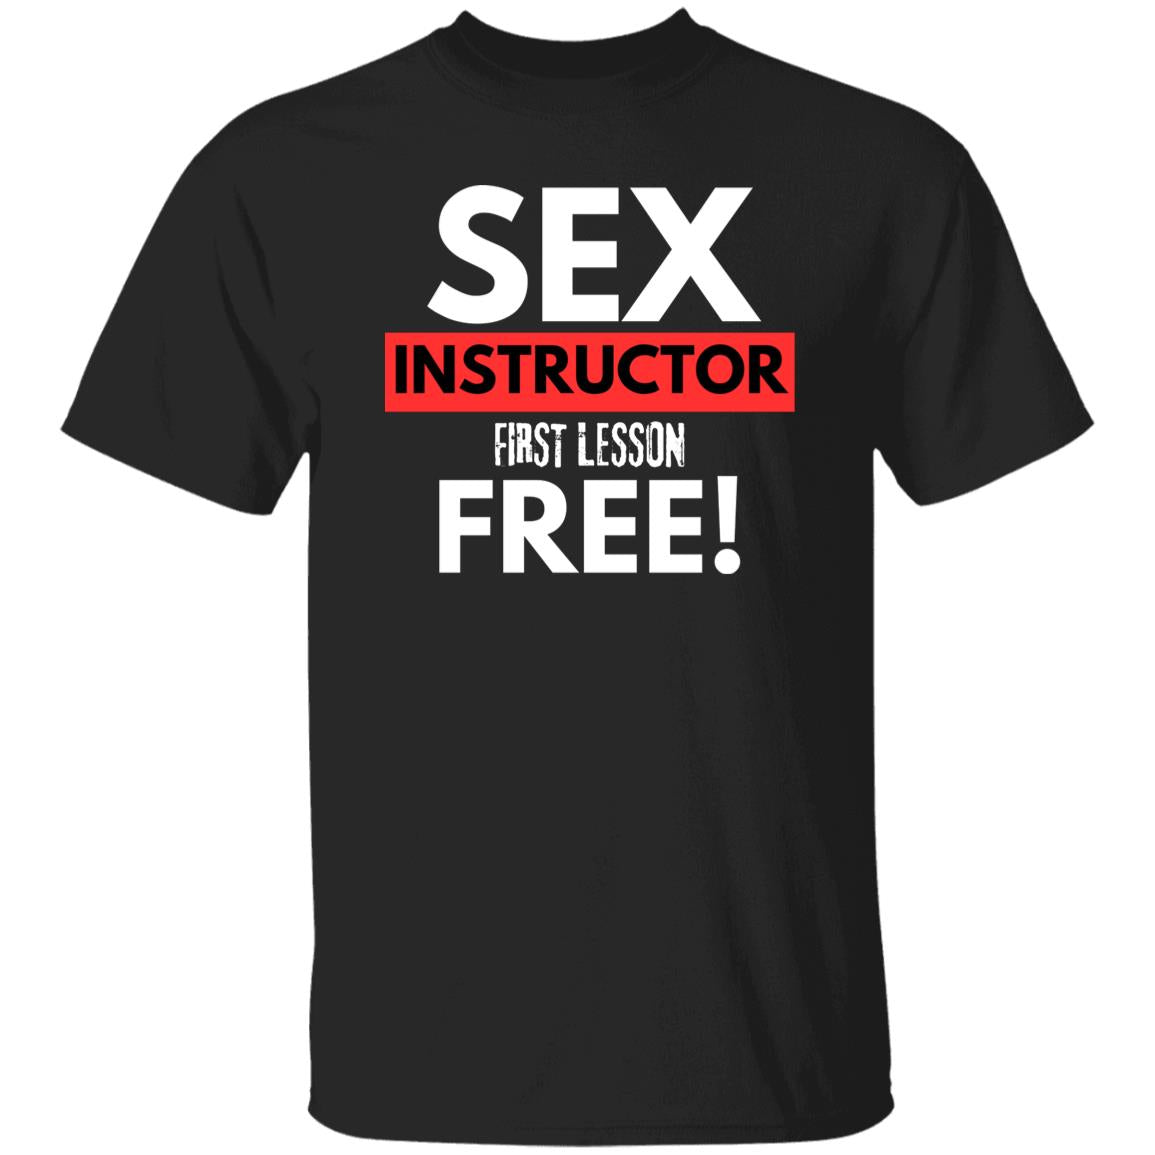 Sex Instructor First Lesson Free T-Shirt, Adult Humor Tshirt